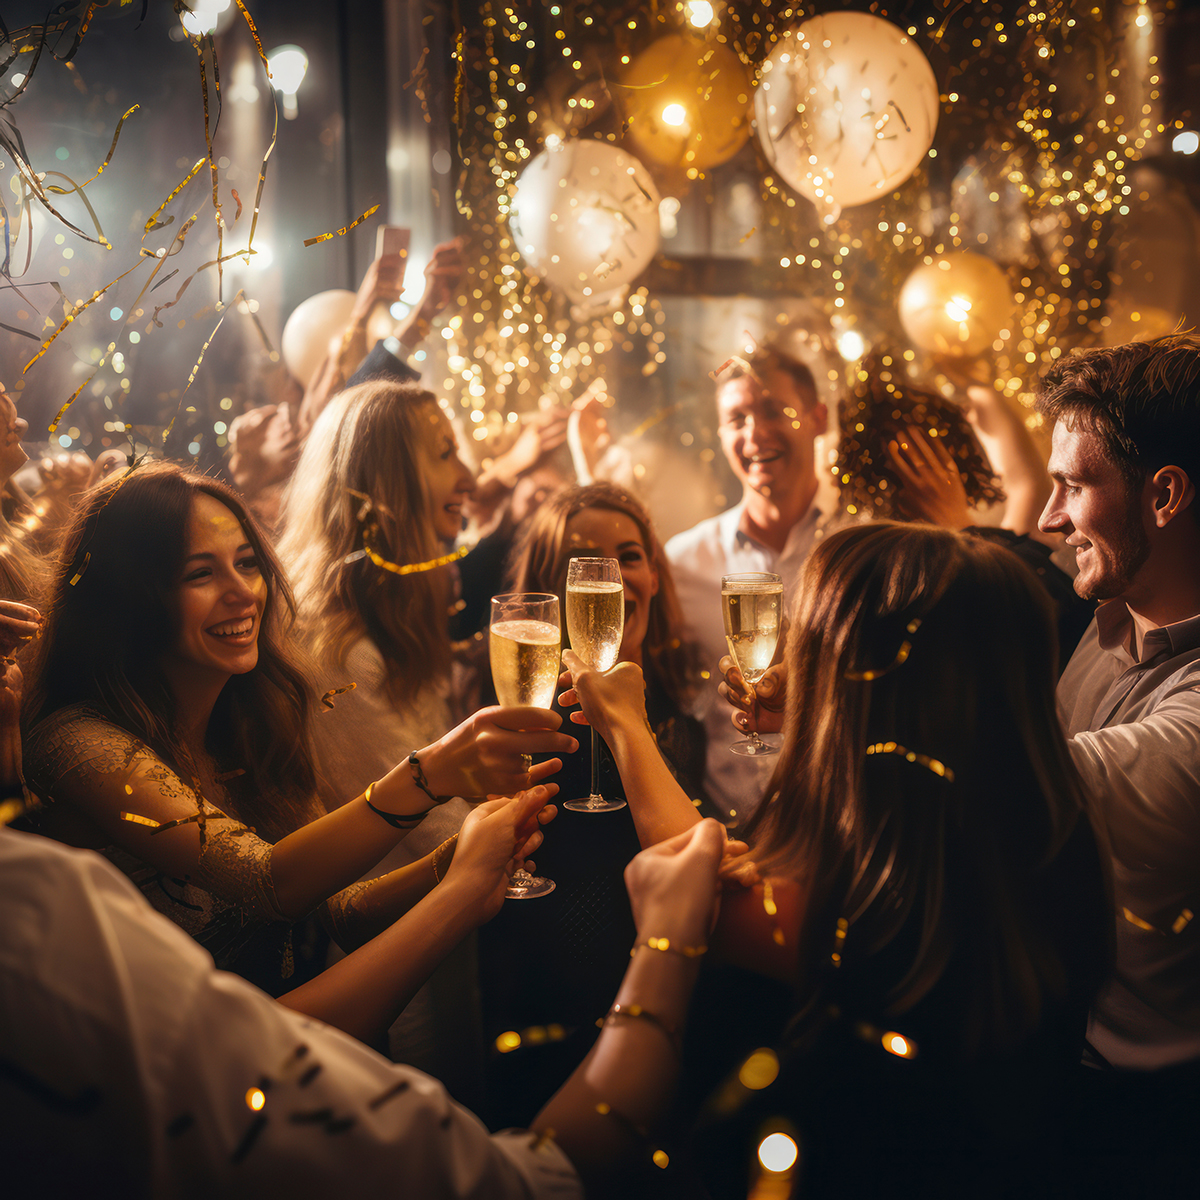 New Year’s Resolutions: Why Boosting Friendships Should Top Your List